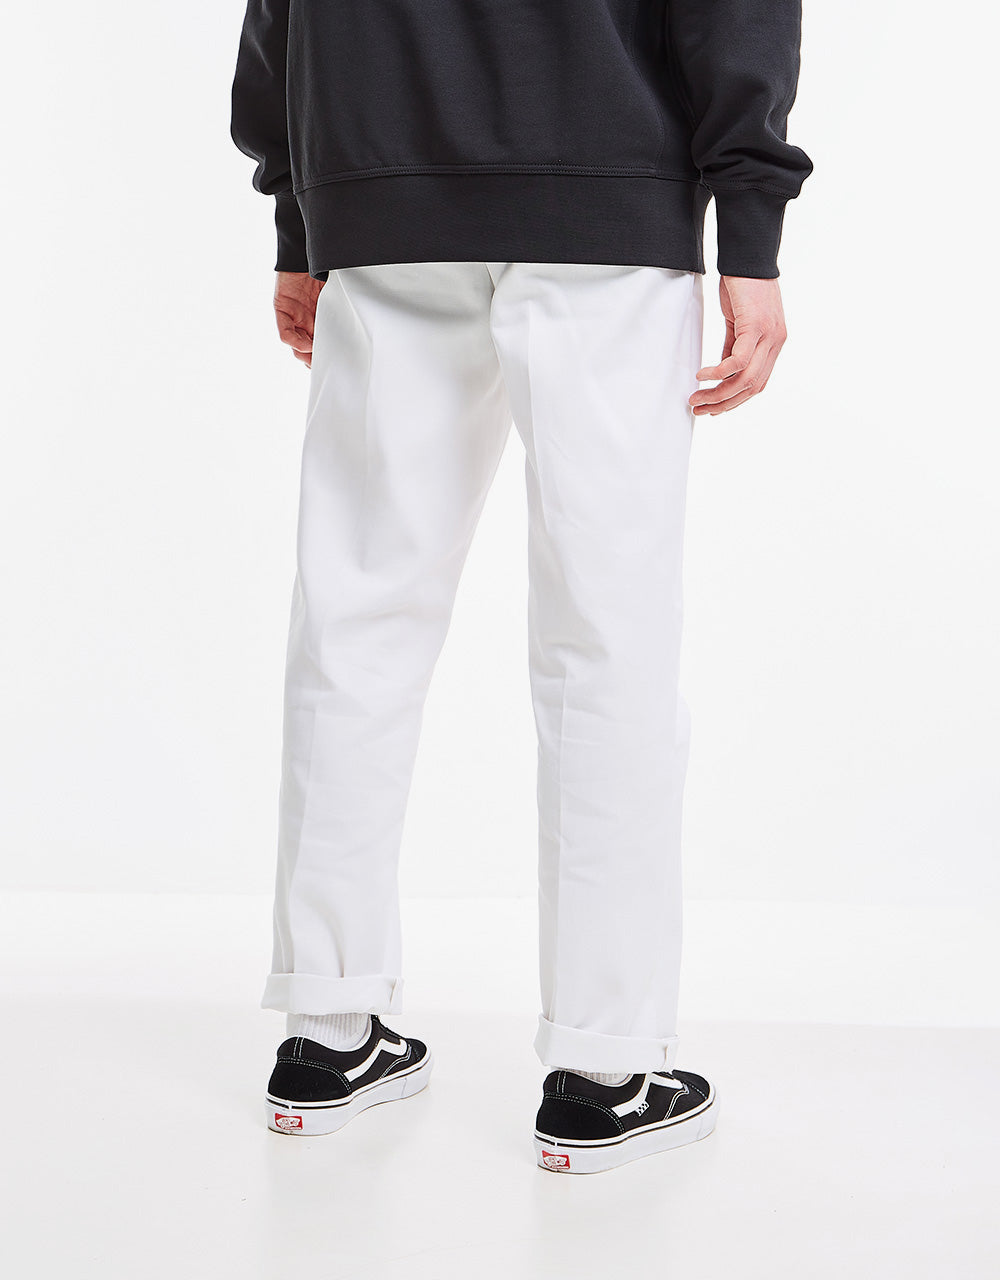 Dickies 874 Recycled Work Pant - White